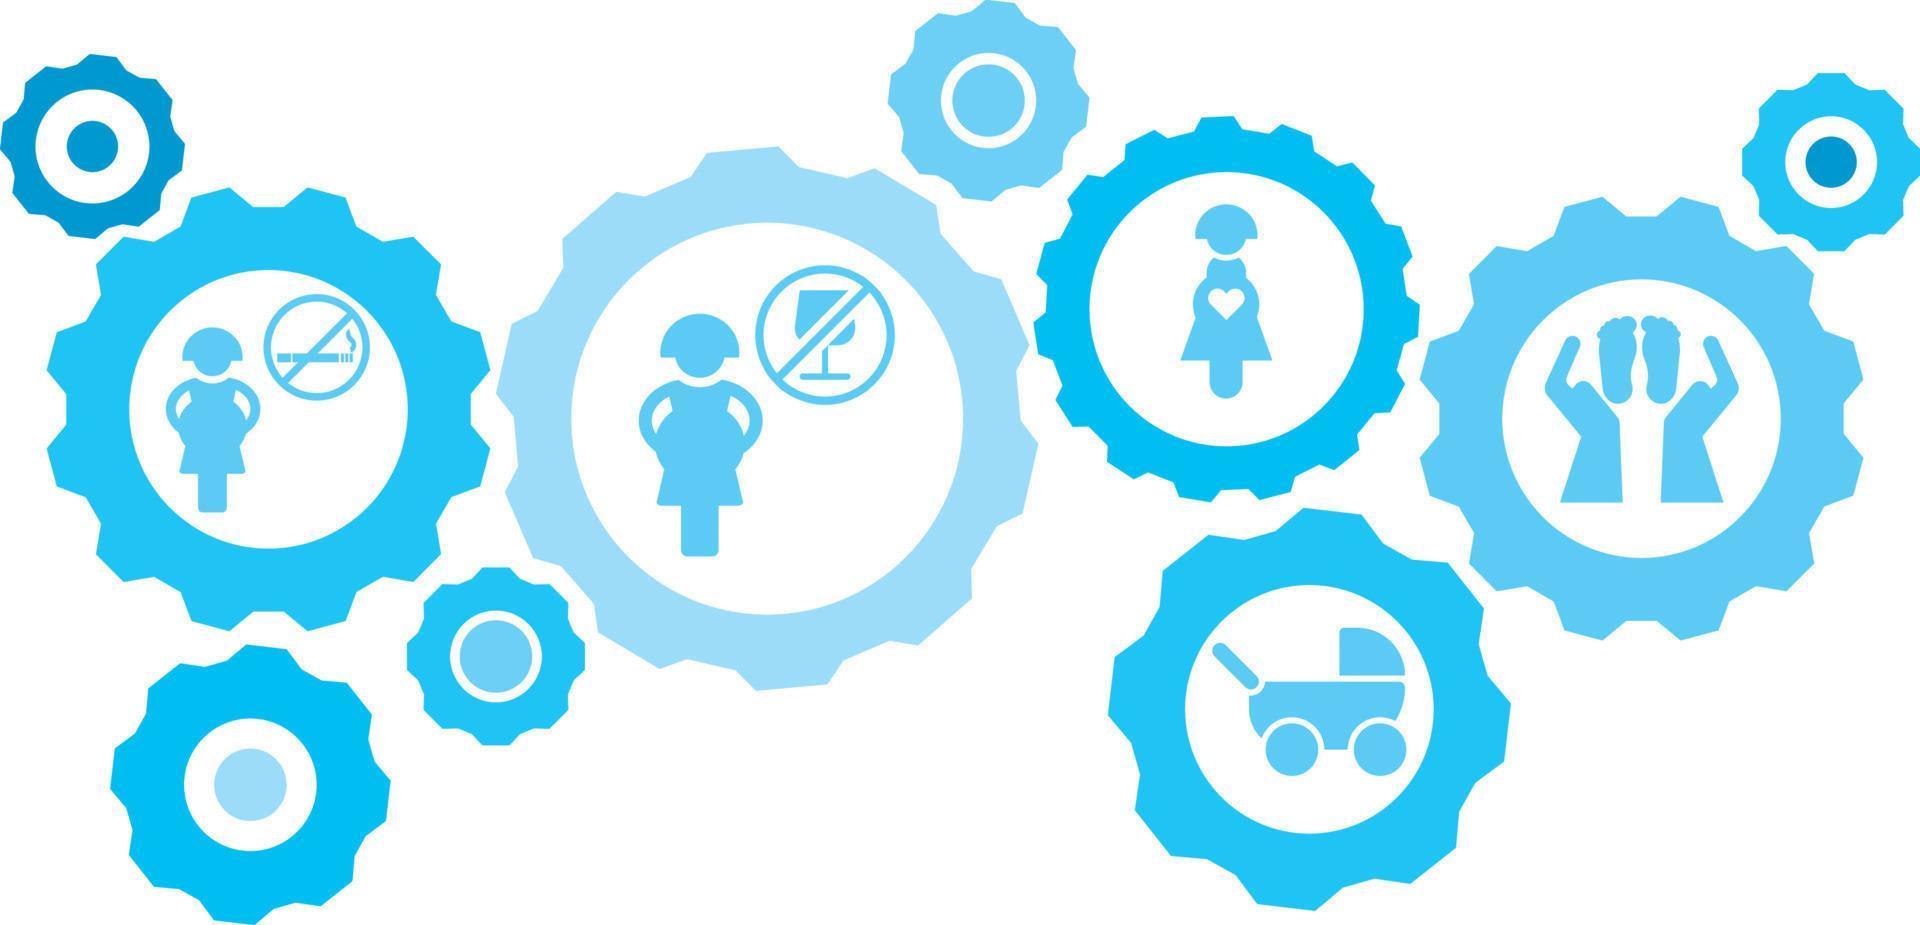 Connected gears and vector icons for logistic, service, shipping, distribution, transport, market, communicate concepts. Baby, stroller gear blue icon set .